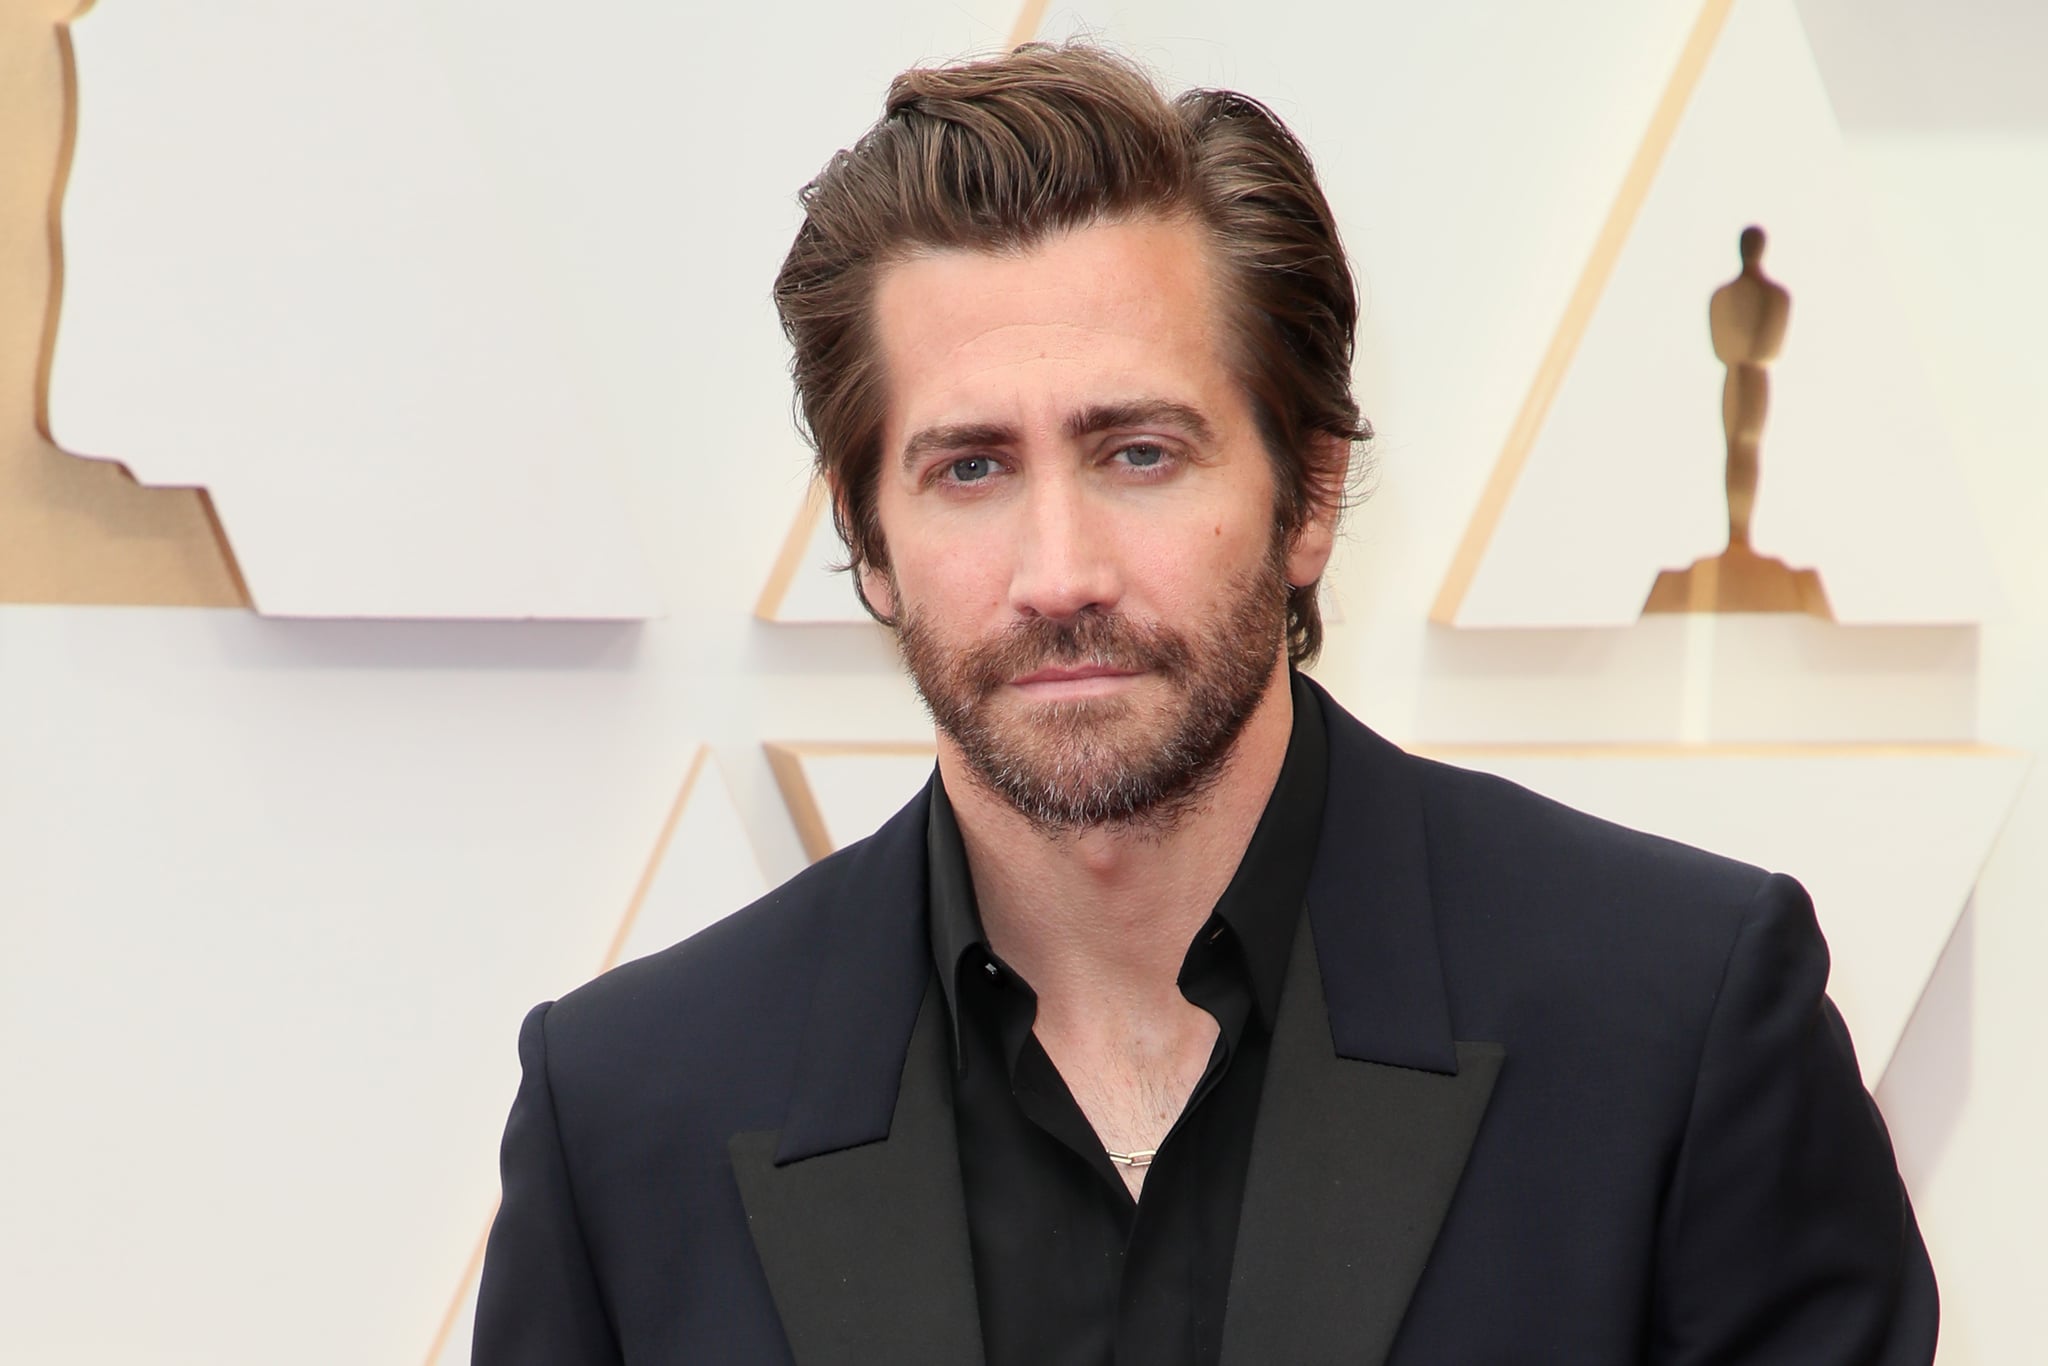 HOLLYWOOD, CALIFORNIA - MARCH 27: Jake Gyllenhaal attends the 94th Annual Academy Awards at Hollywood and Highland on March 27, 2022 in Hollywood, California. (Photo by David Livingston/Getty Images)